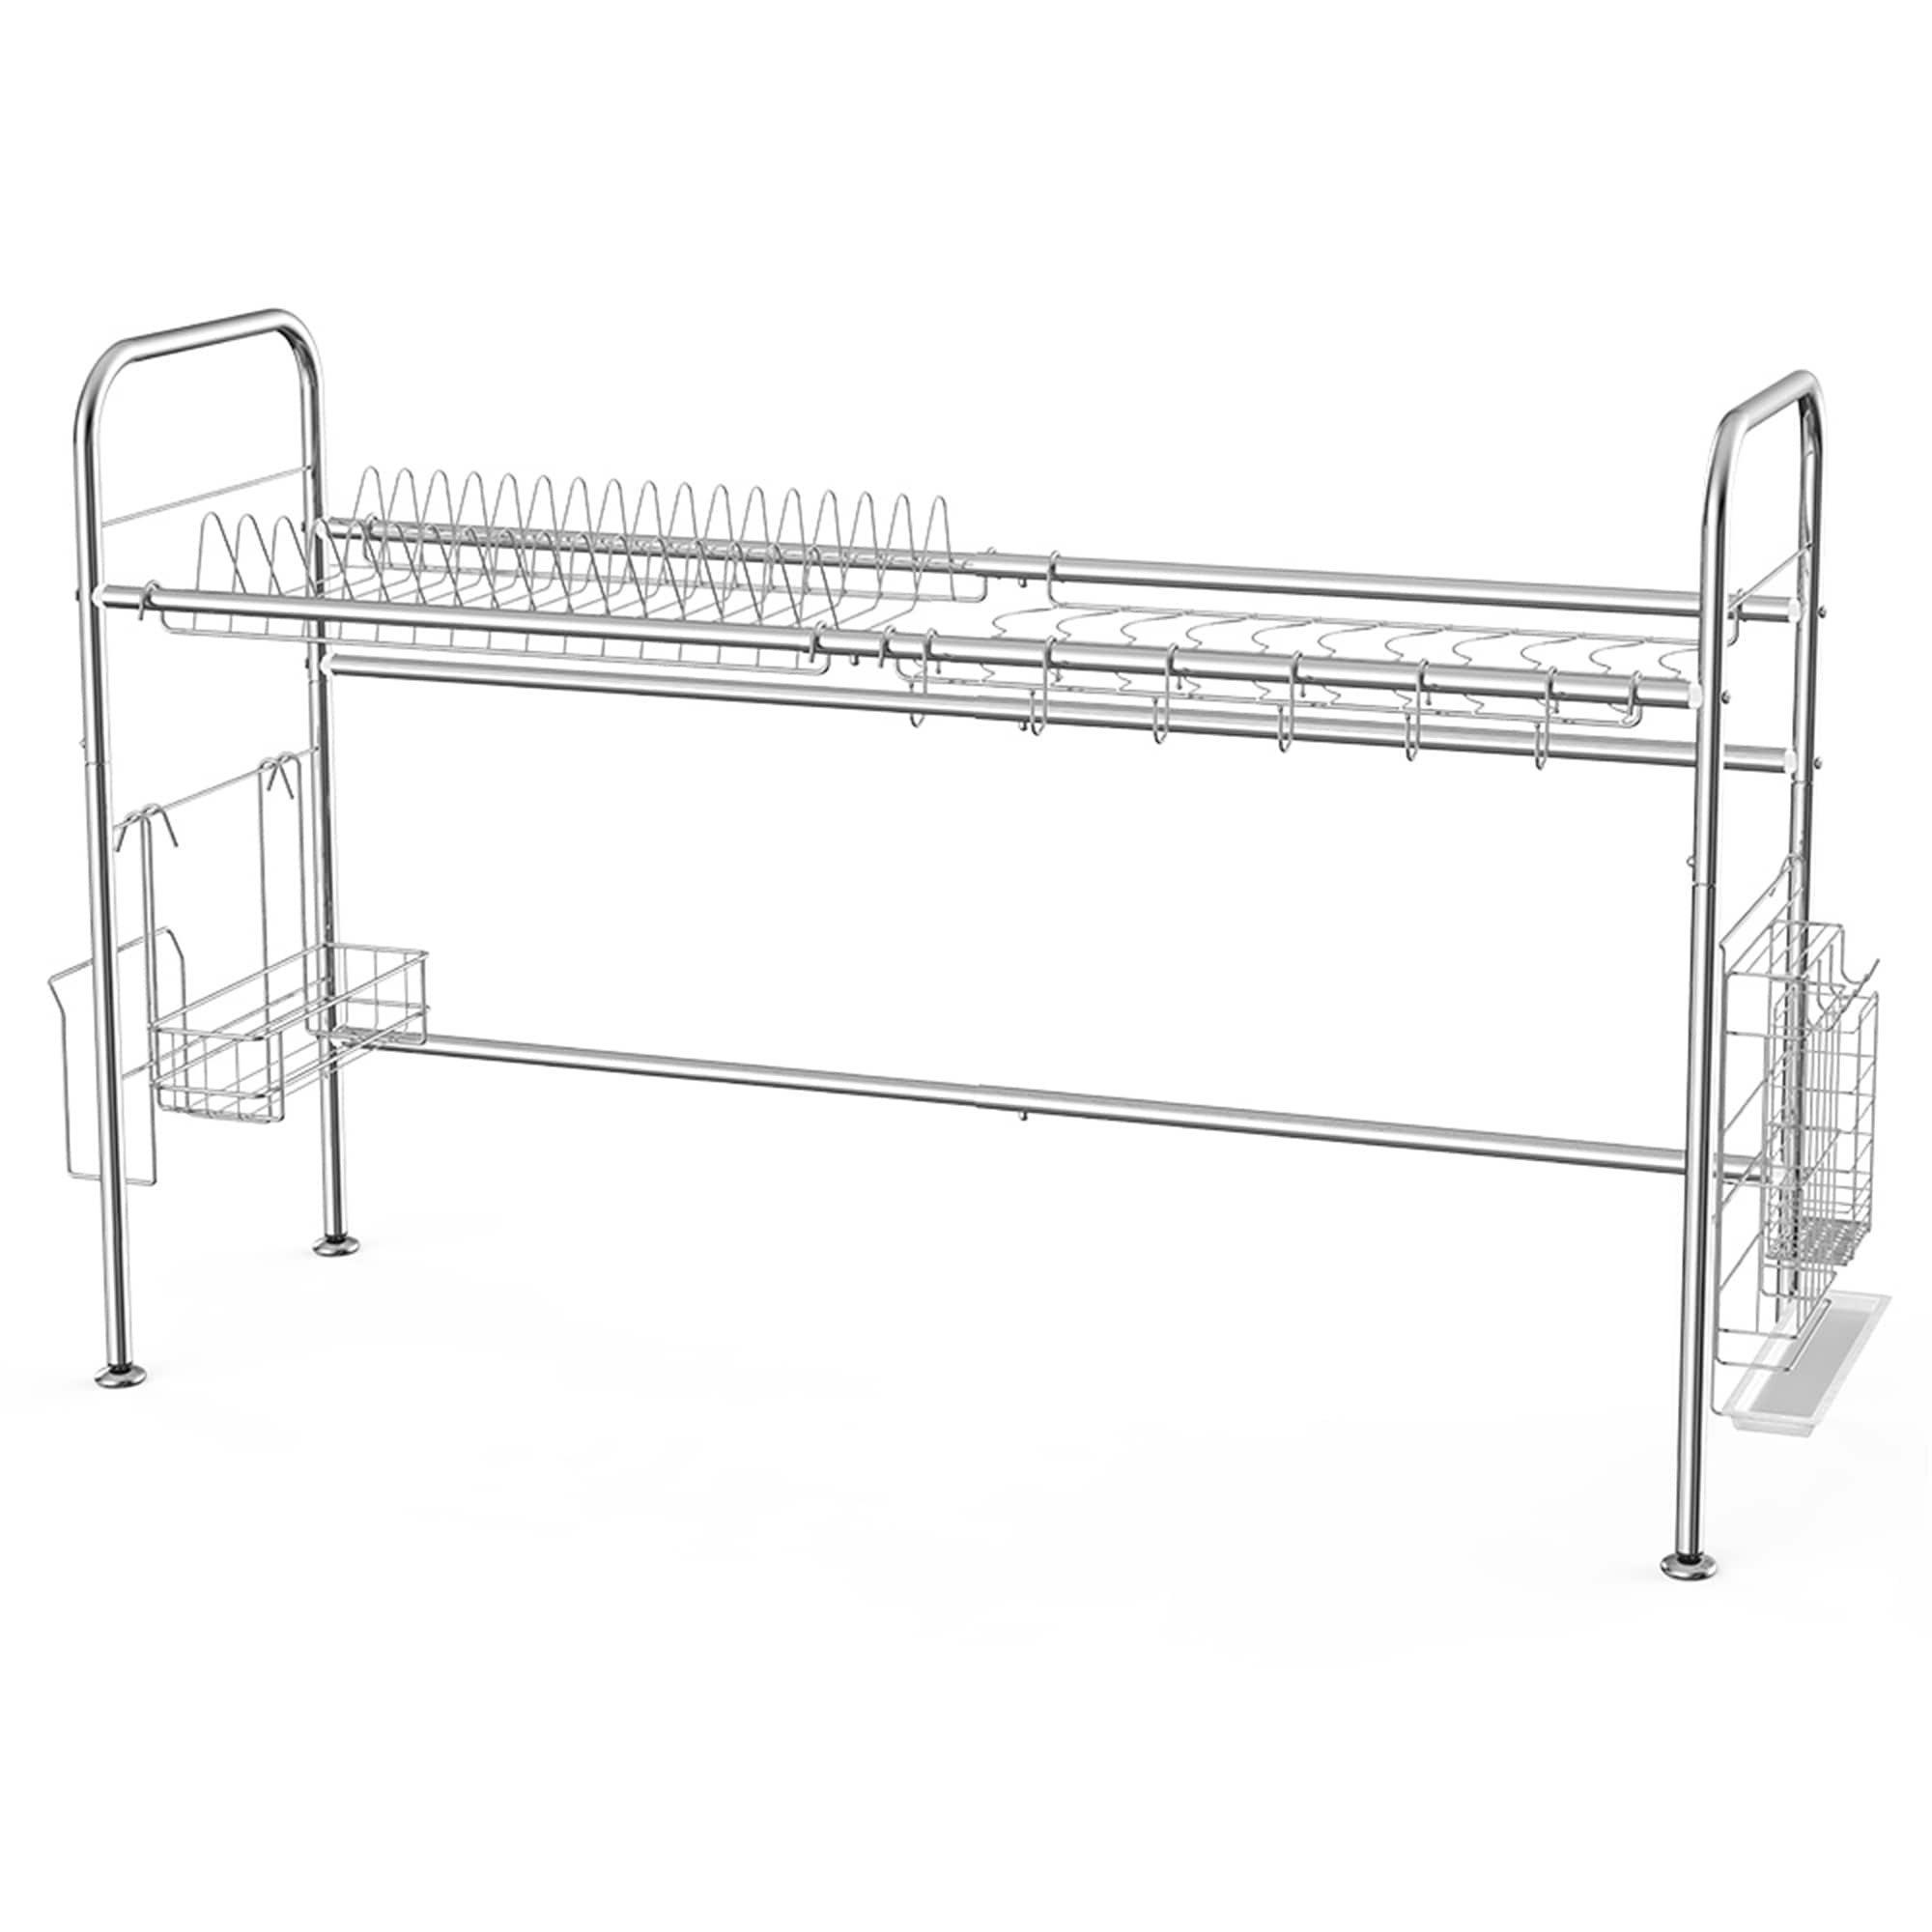 https://ak1.ostkcdn.com/images/products/is/images/direct/899527039e2edfc8faa75eb37e22b49453f997d4/Single-Layer-Adjustable-Dish-Rack%2C-Stainless-Steel.jpg